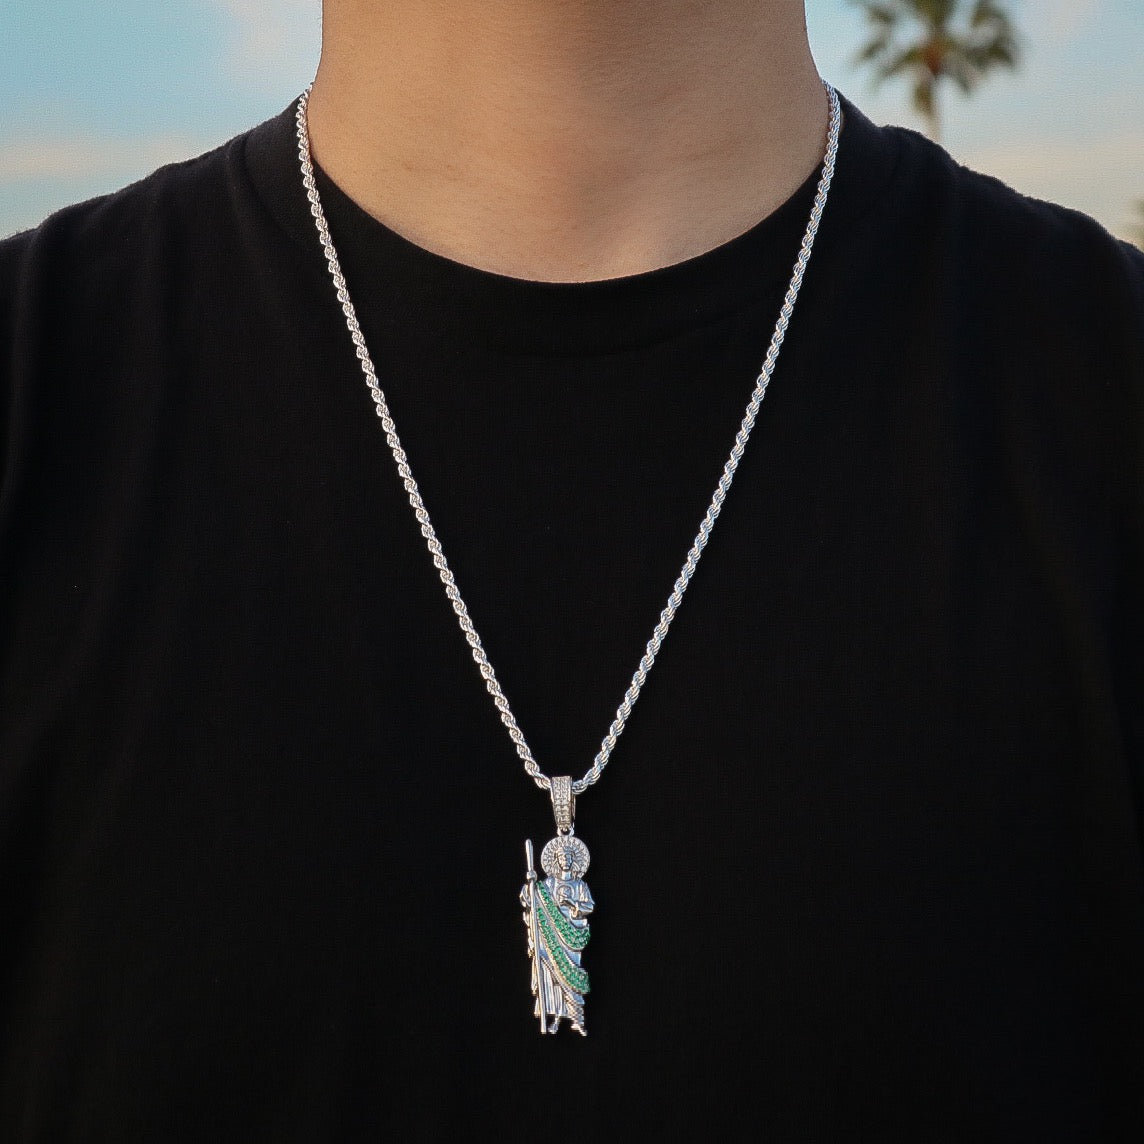 San Judas with Green Stones - Real 925 Silver